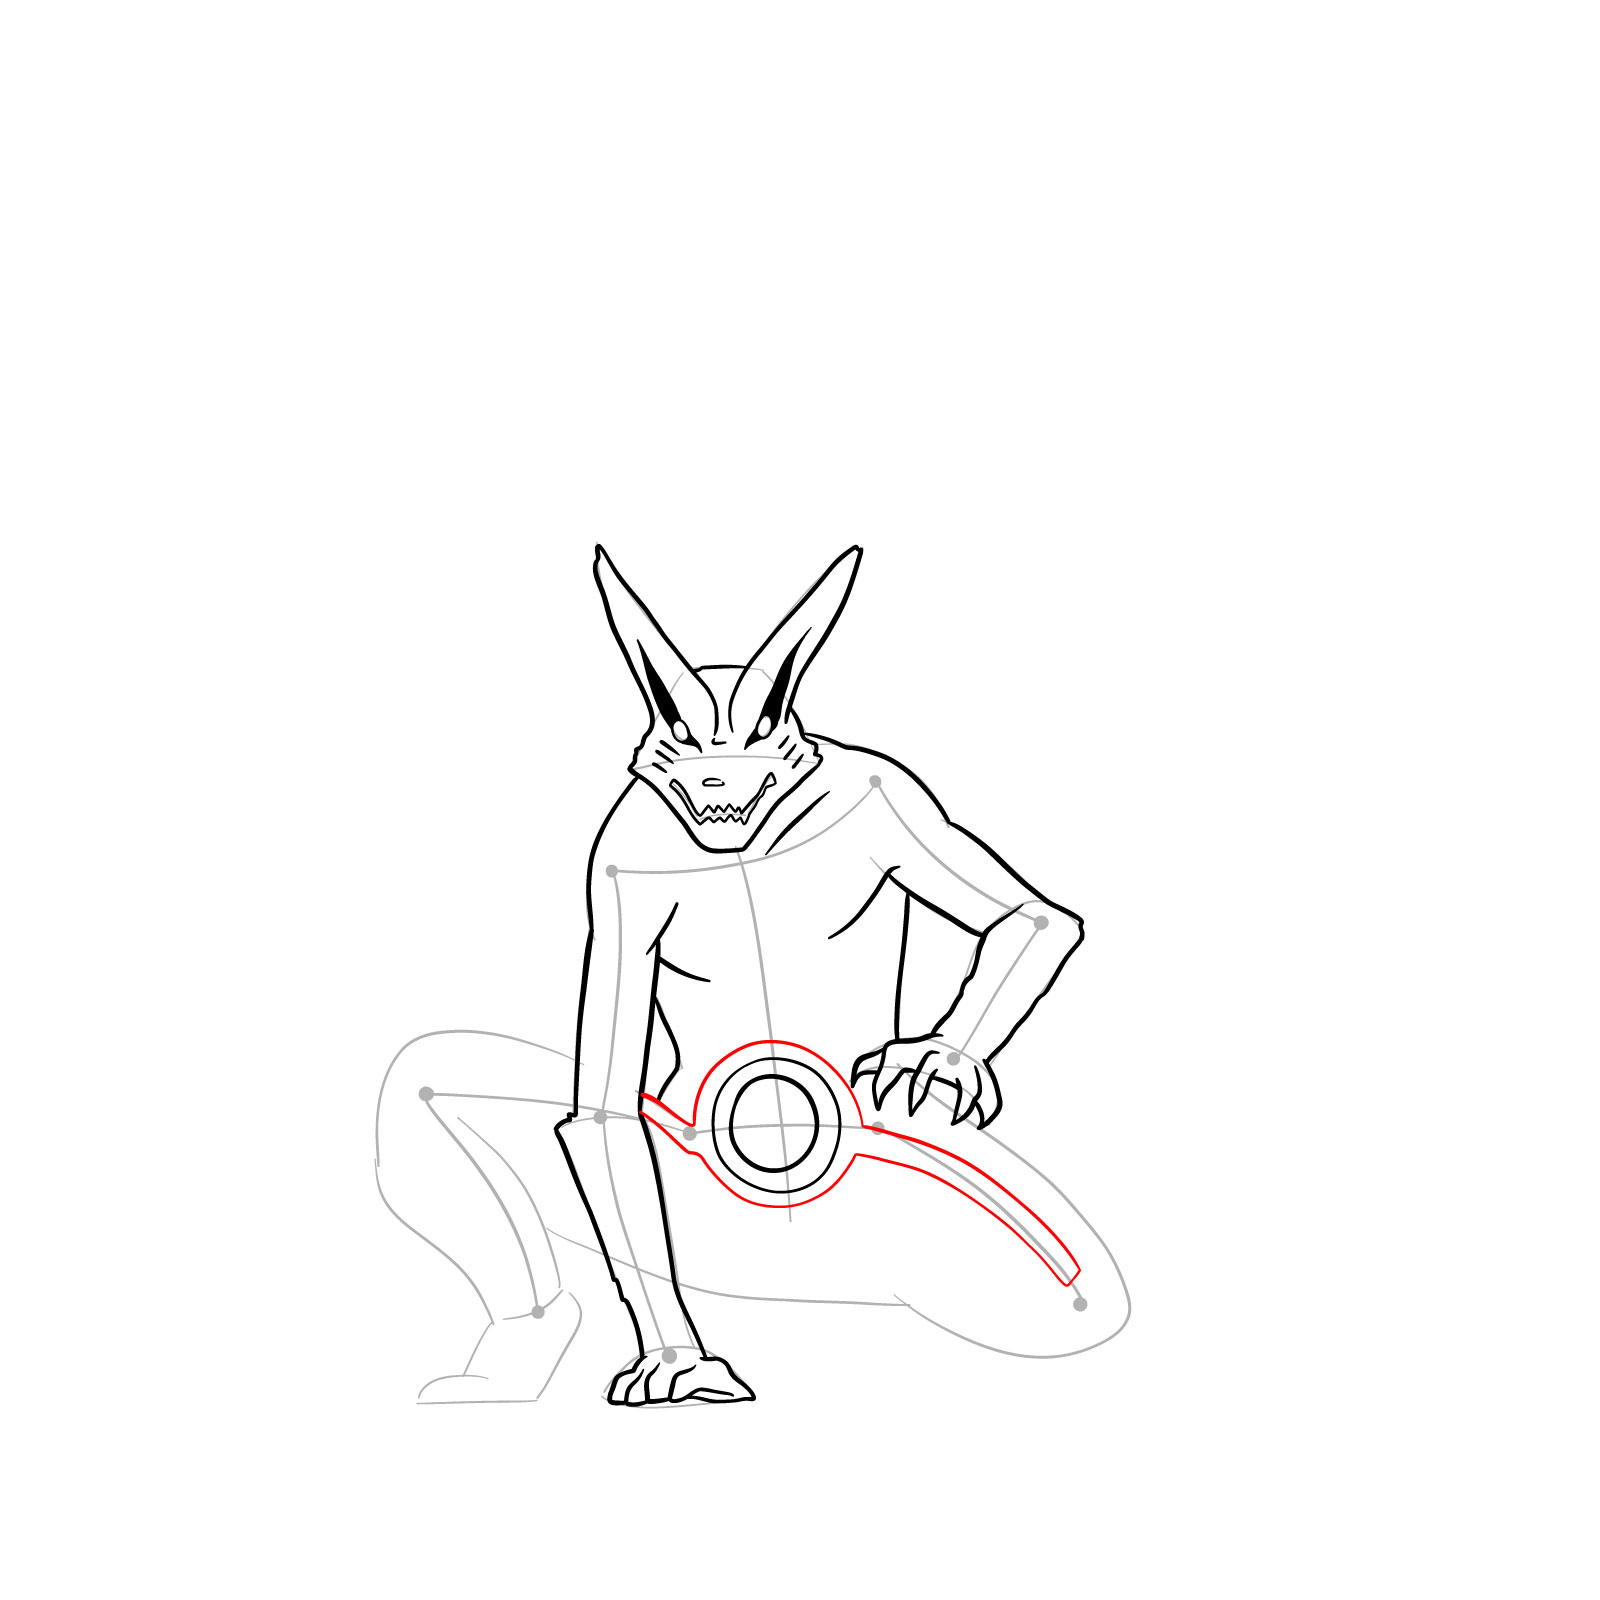 How to Draw Naruto's Tailed Beast Mode - step 22